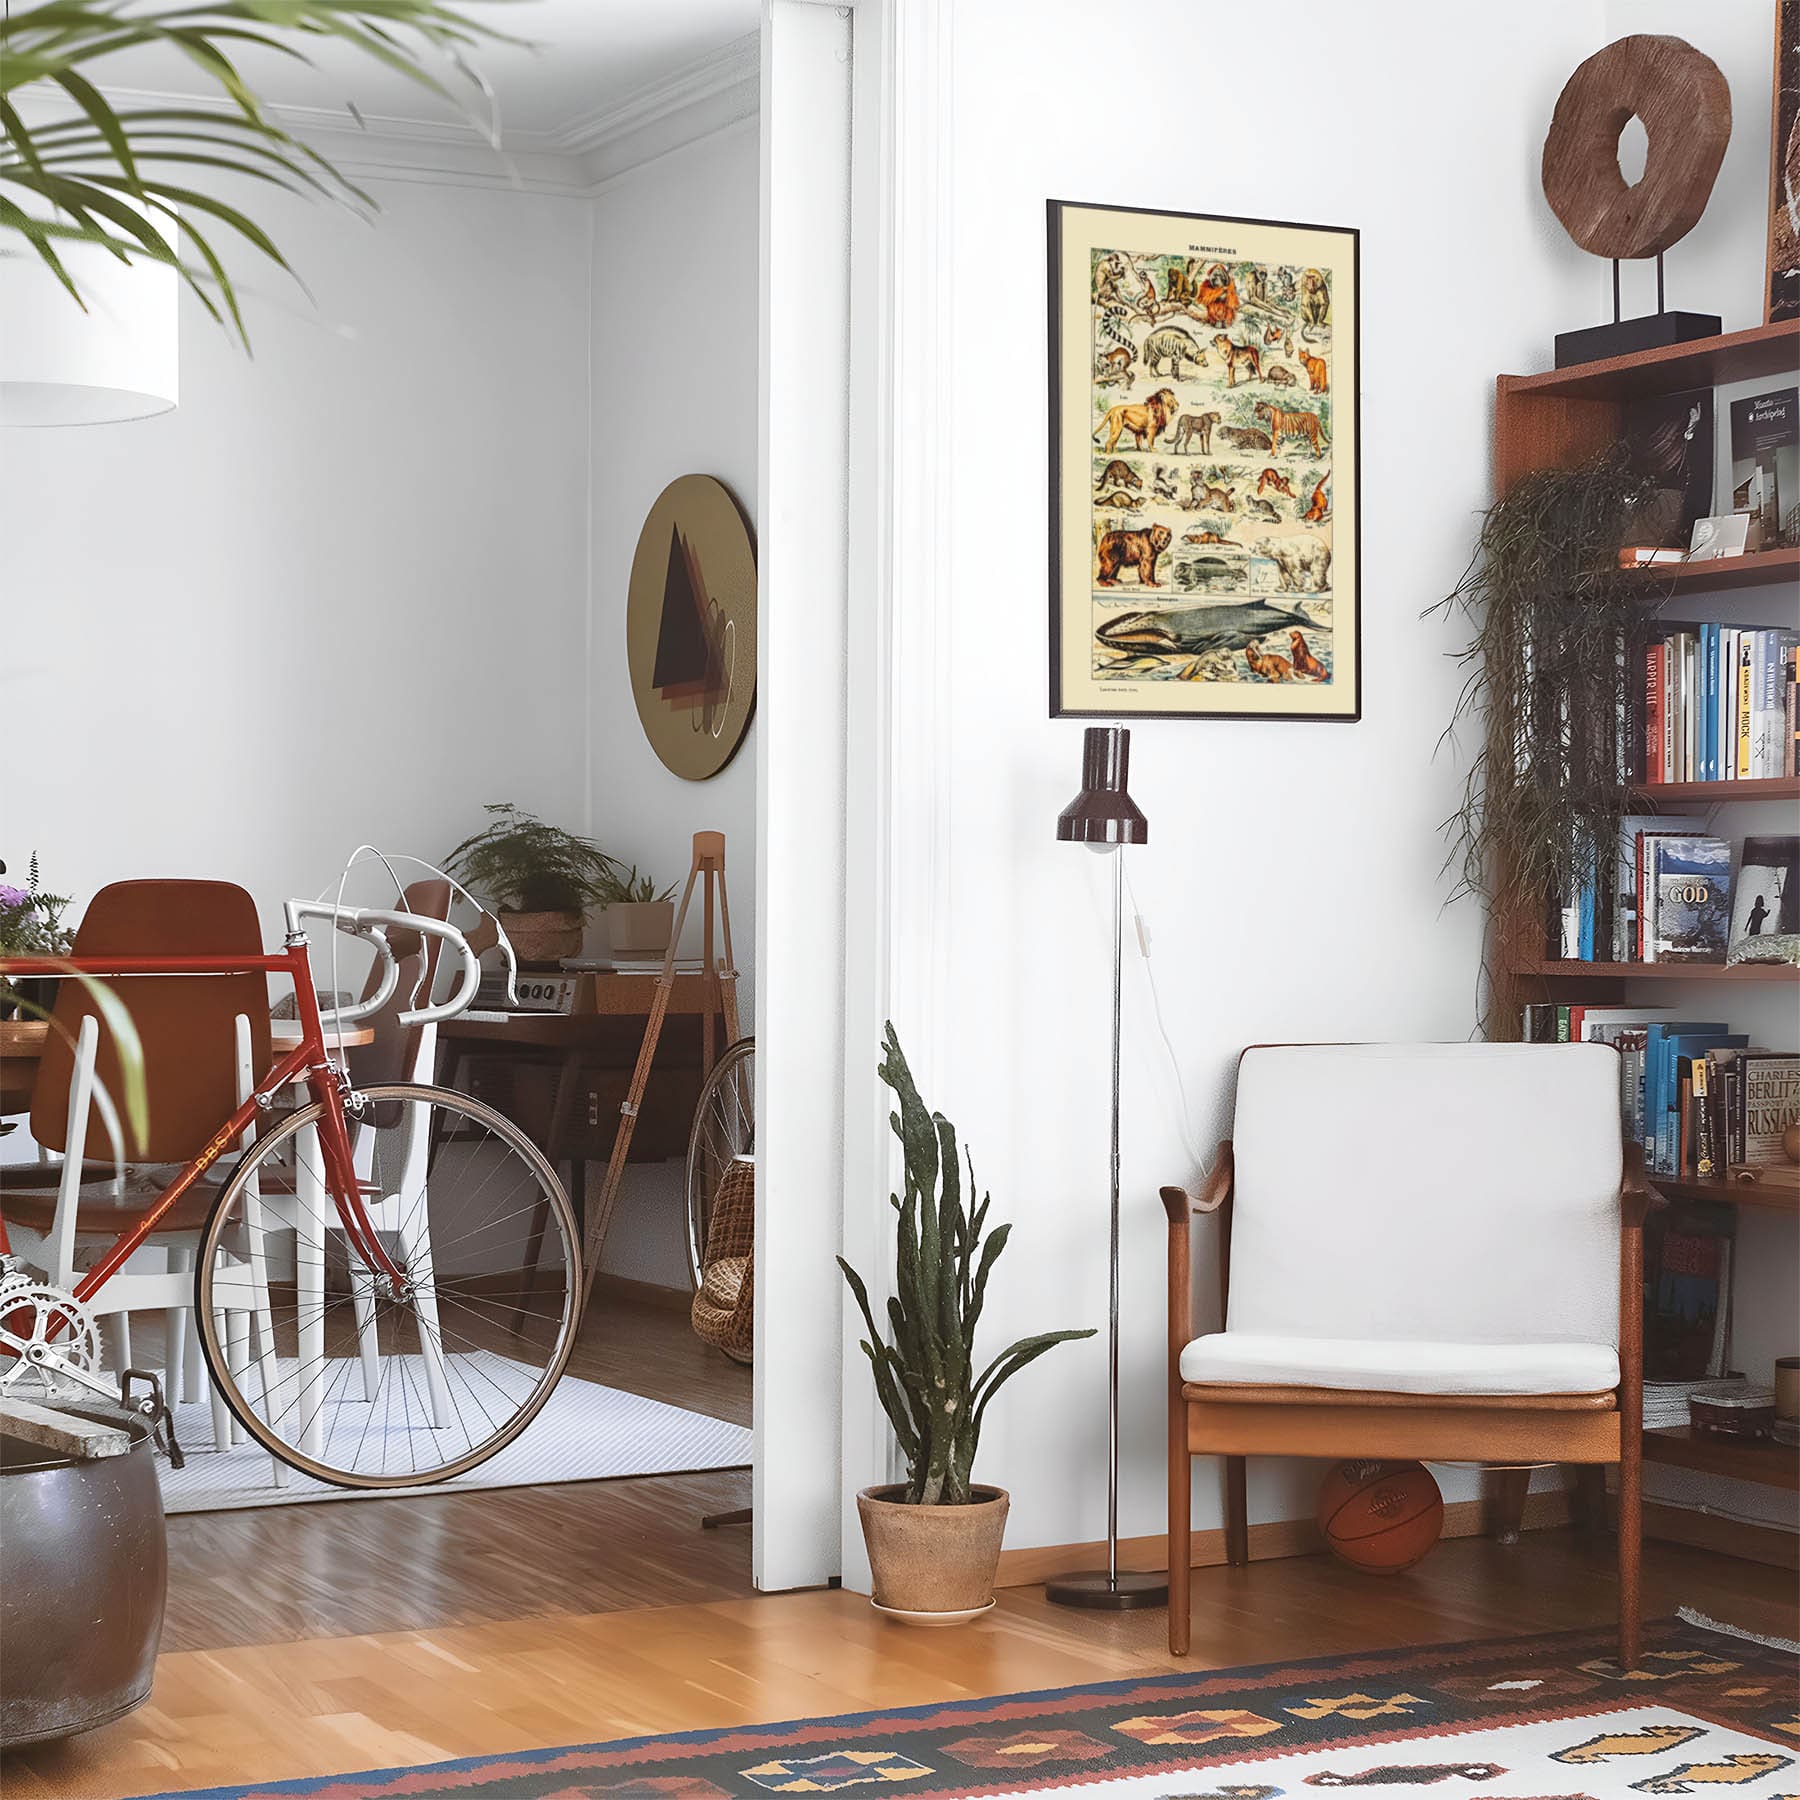 Living space with a black leather couch and table with a plant and books below a staircase featuring a framed picture of All Sorts of Mammals